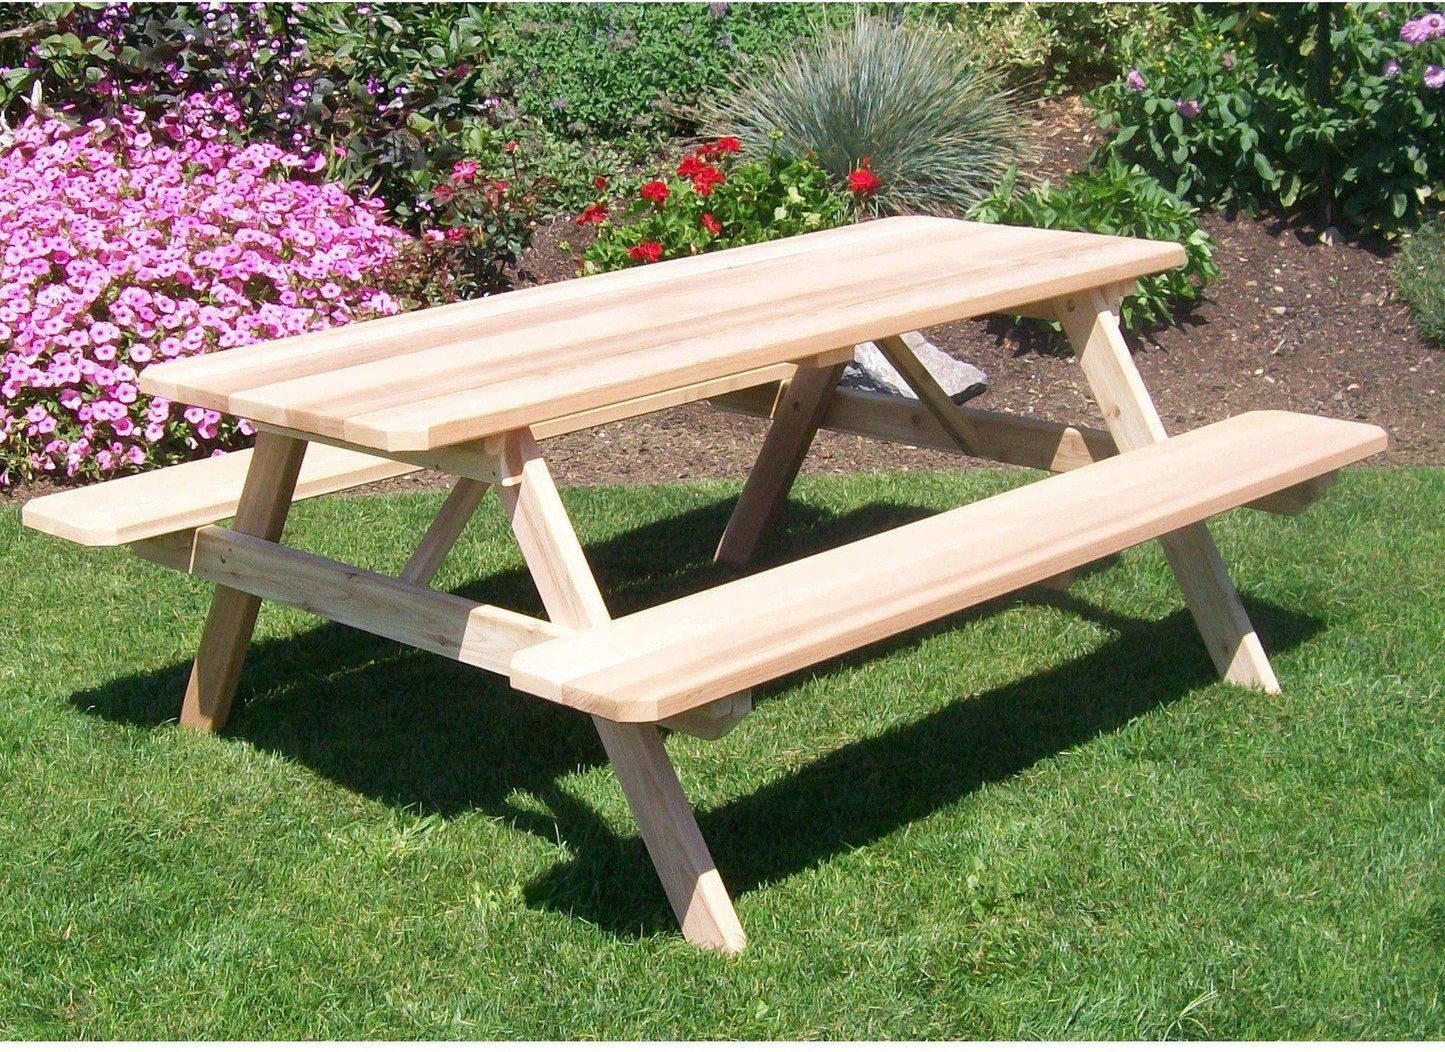 A & L FURNITURE CO. Western Red Cedar 8' Table w/Attached Benches - Specify for FREE 2" Umbrella Hole  - Ships FREE in 5-7 Business days - Rocking Furniture